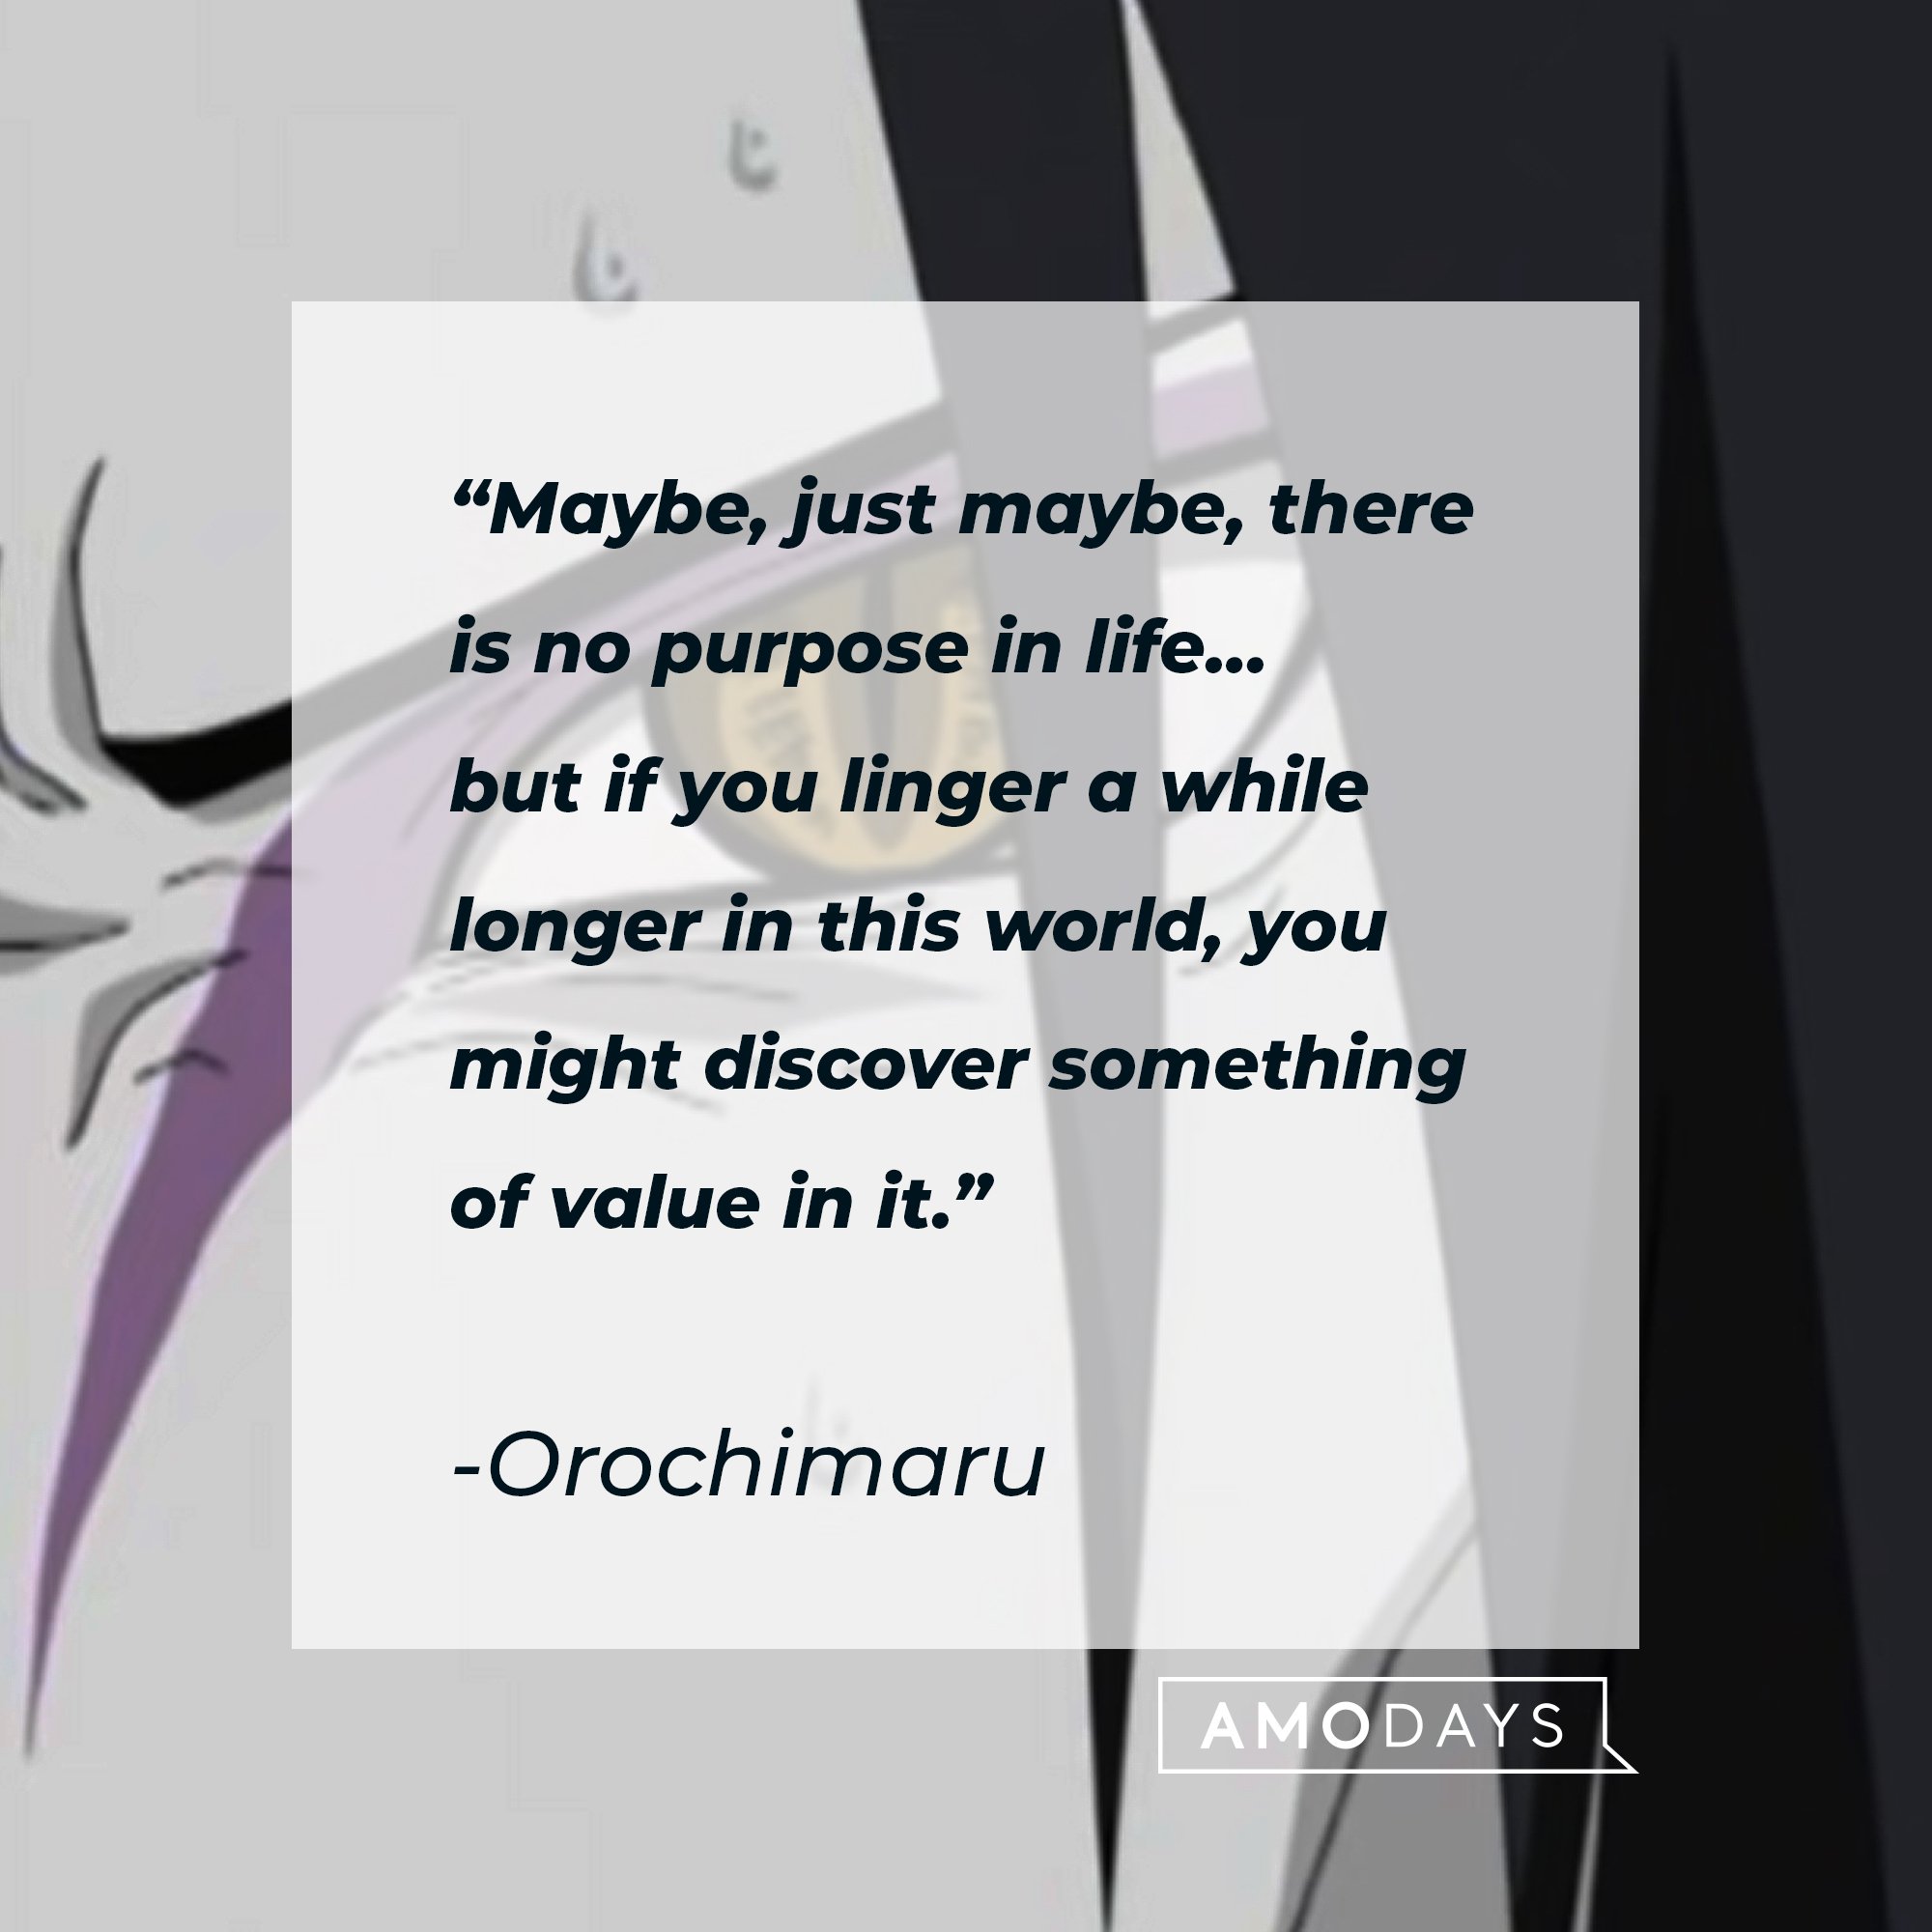 Orochimaru's quote: “Maybe, just maybe, there is no purpose in life… but if you linger a while longer in this world, you might discover something of value in it.” | Image: AmoDays